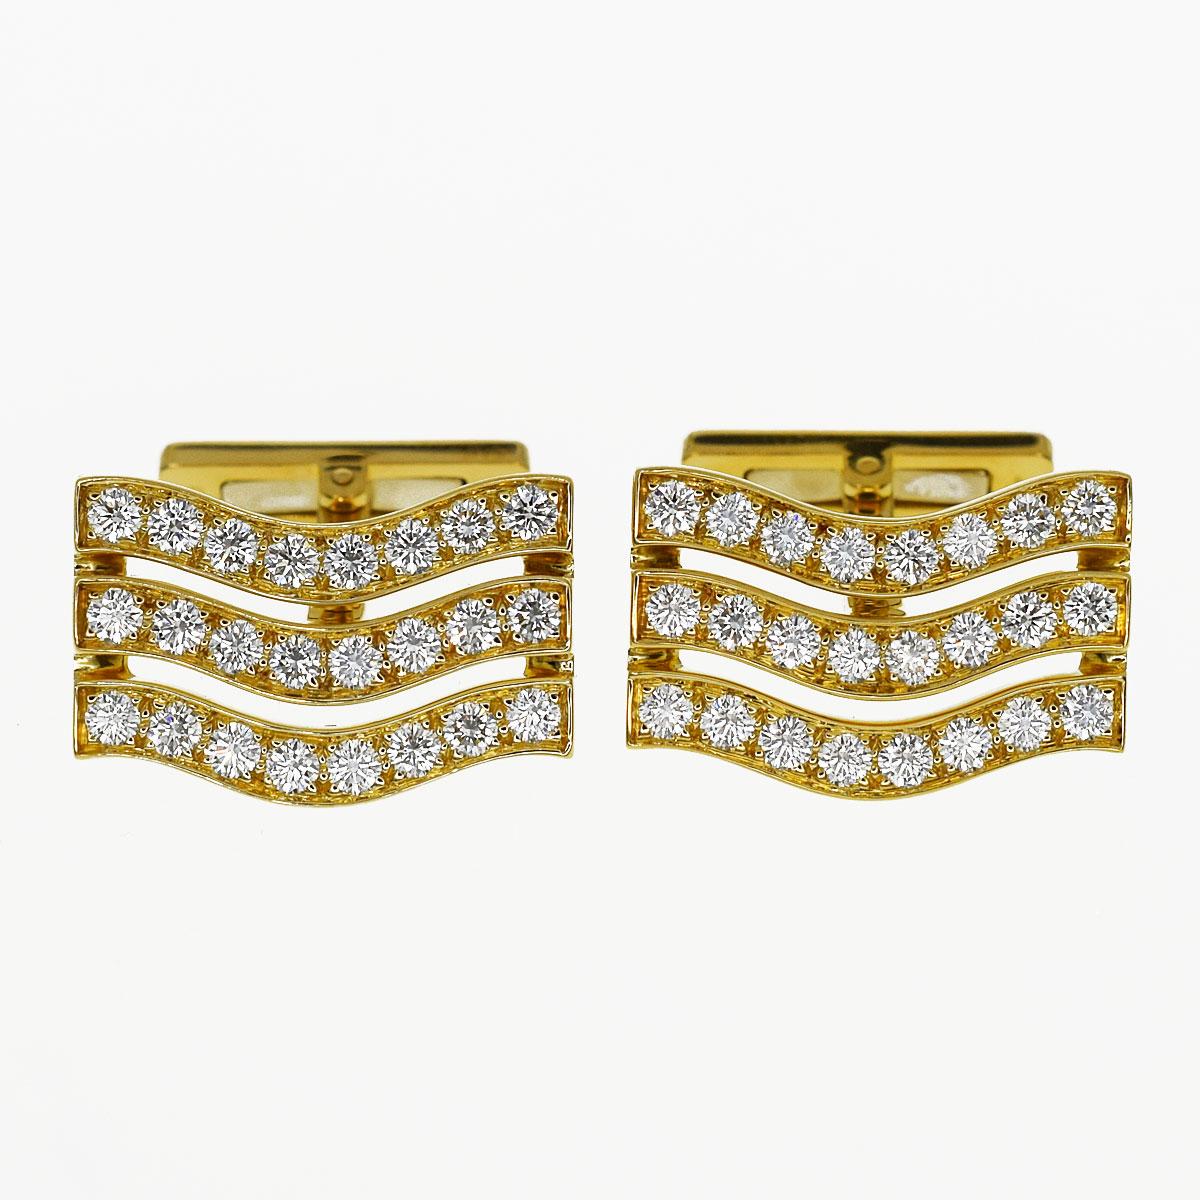 Brand:Cartier
Name:Diamond Cufflinks
Material :Diamonds,750 K18 YG Yellow Gold
Comes with:Cartier case, Cartier Repair Certificate (May 2019)
full length(inch):21.27mm/0.83